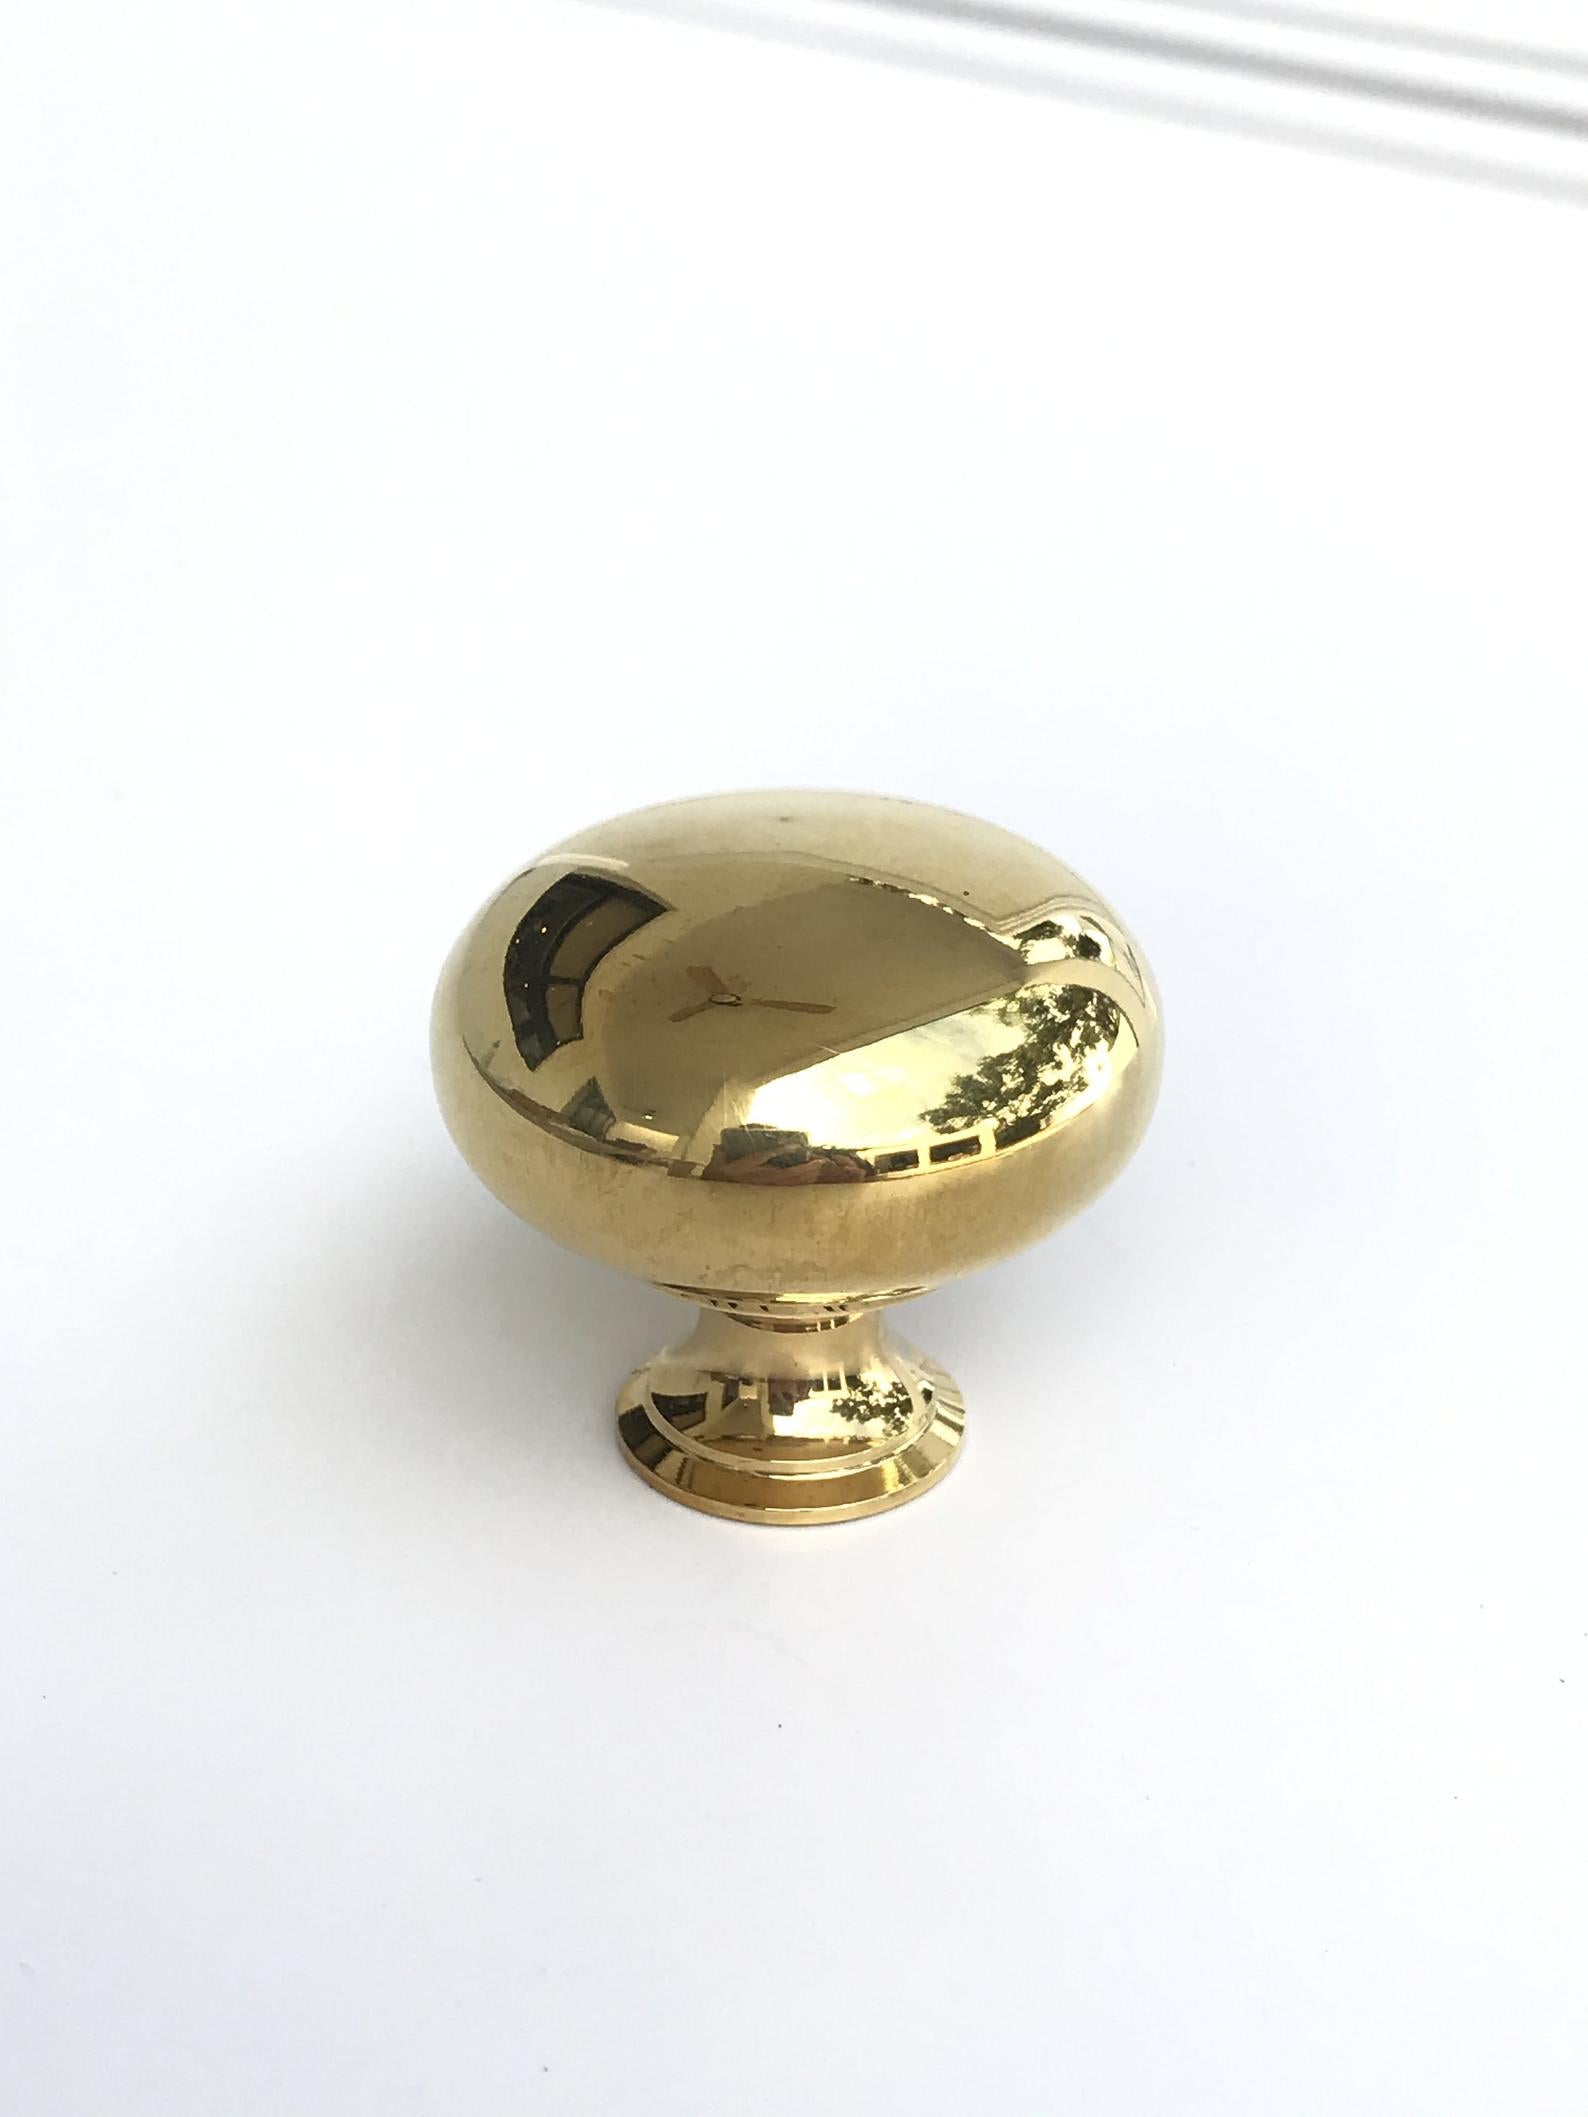 Classic Round Brushed Brass Cabinet Knob + Reviews